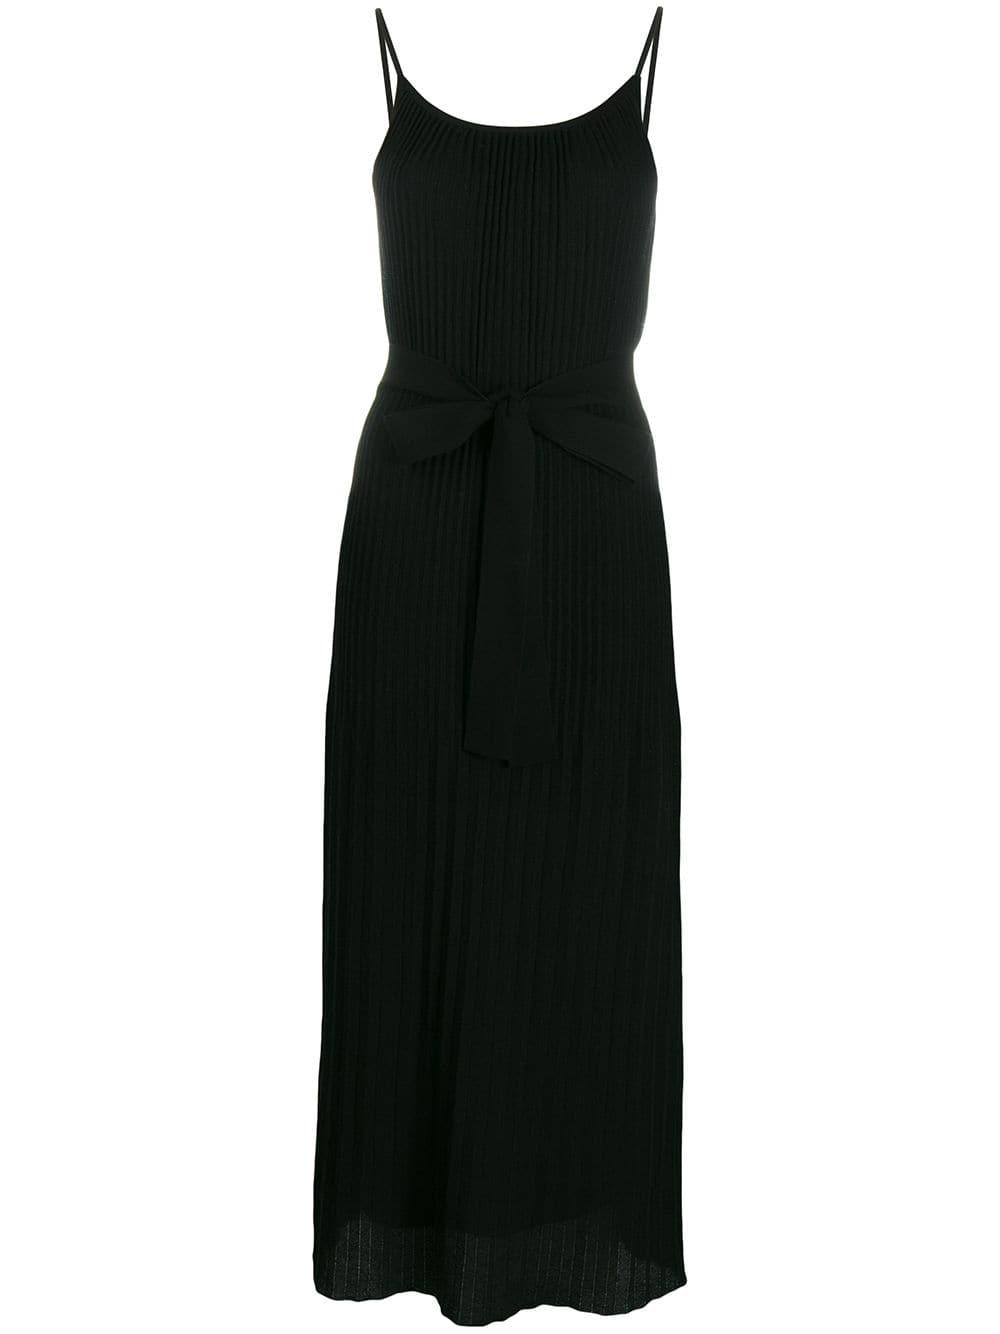 Theory Synthetic Casual Slip Dress in Black - Lyst